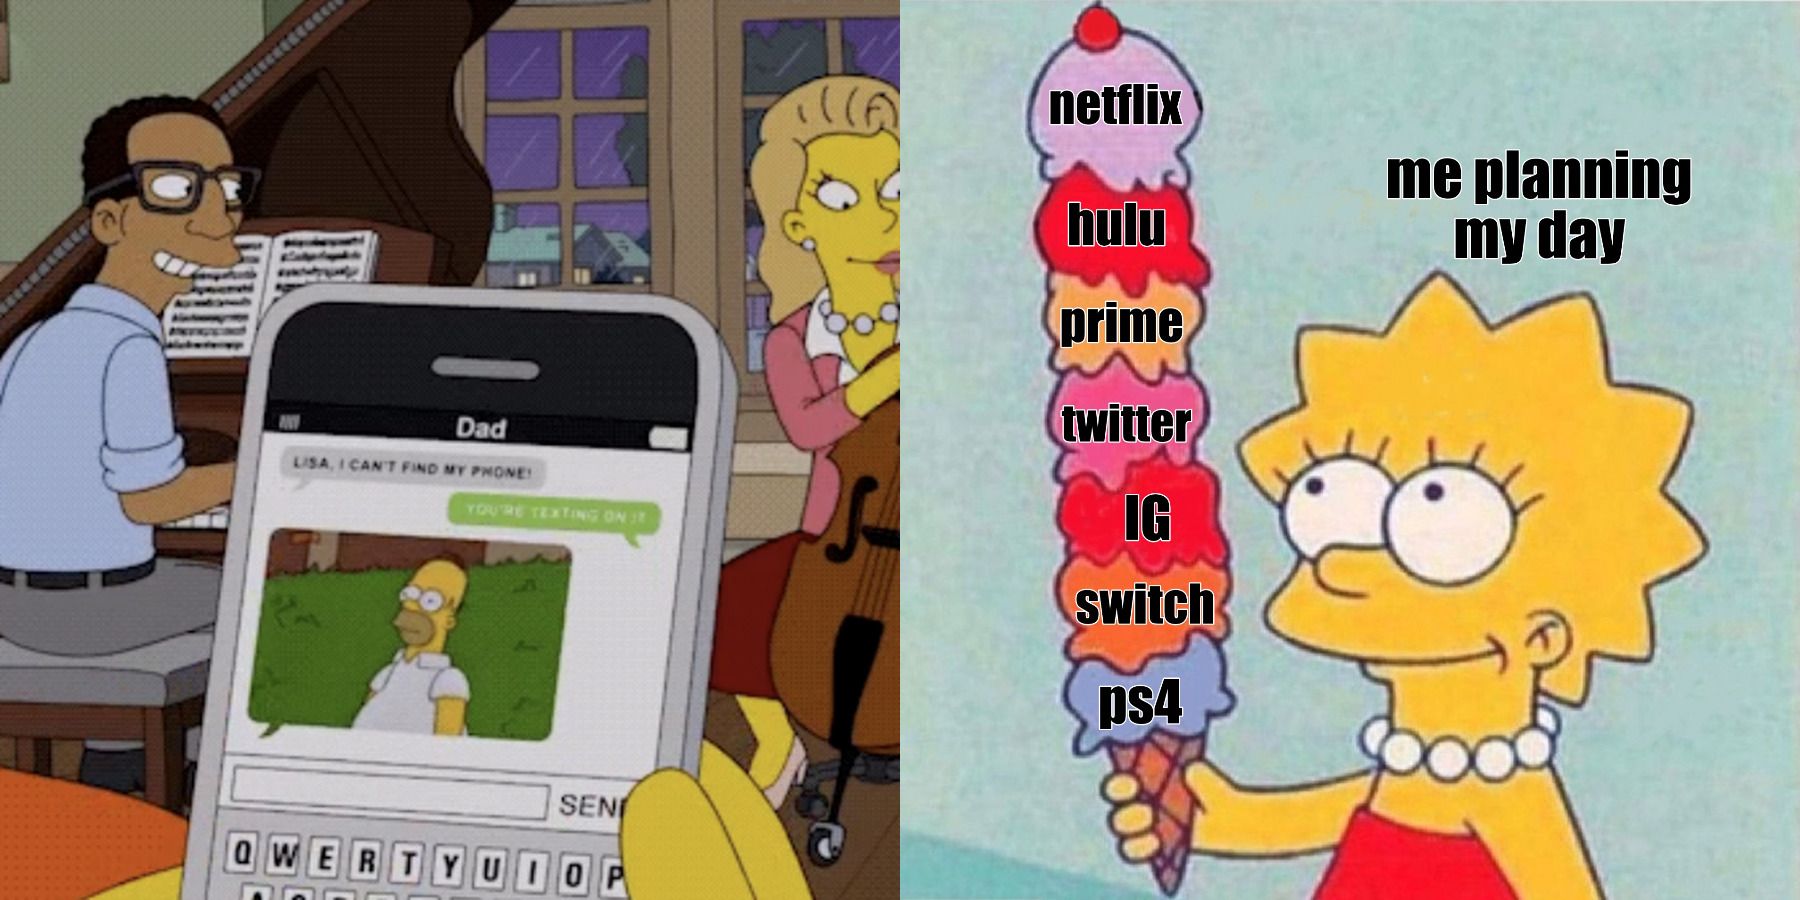 The Simpsons Lisa memes feature